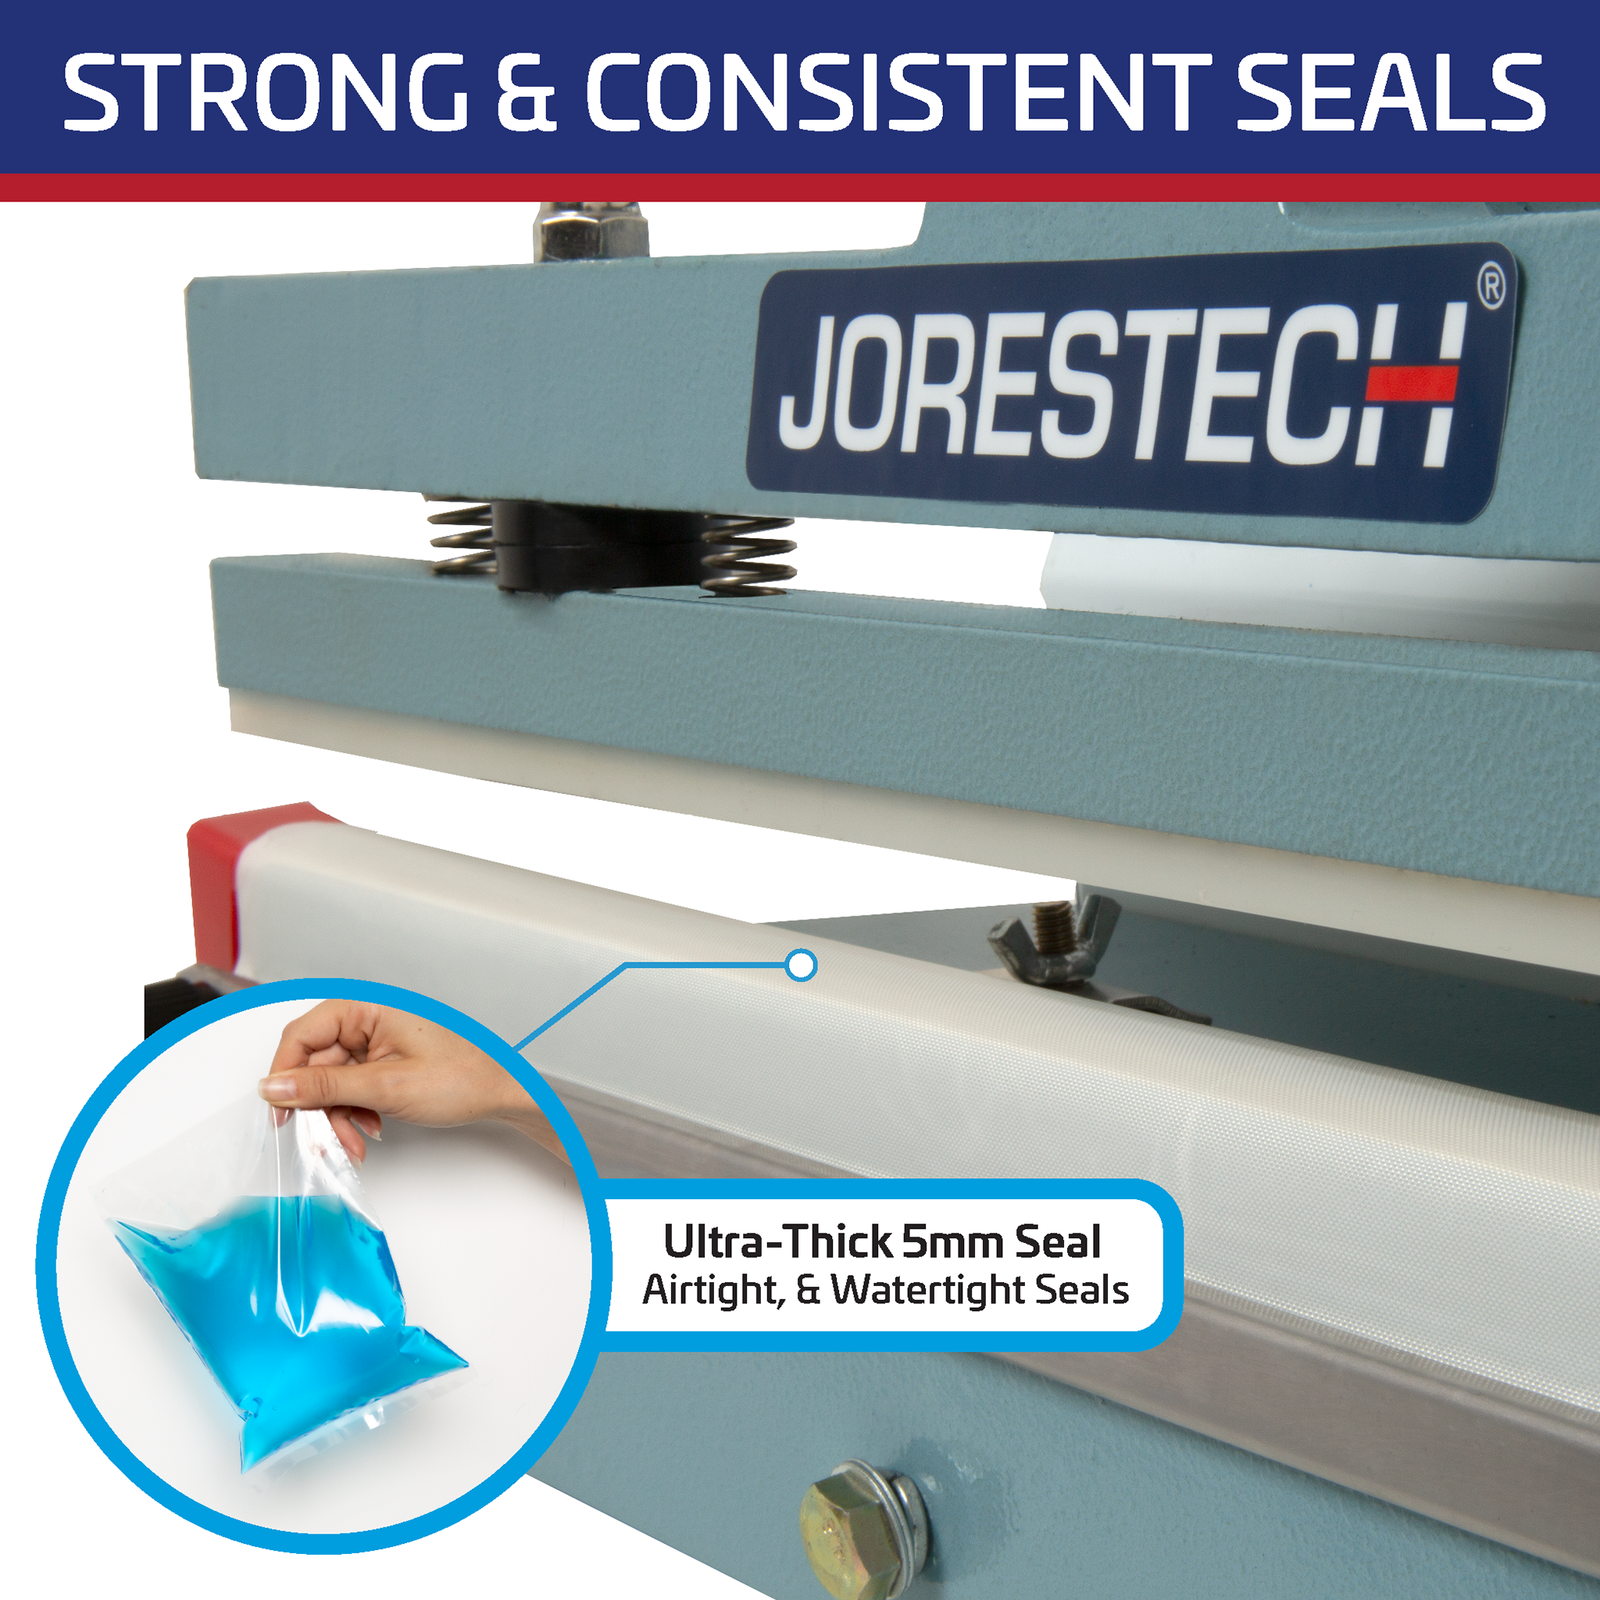 Titled says: “strong and consistent seals” The image is zoomed in showing the sealing element. A Highlighted feature reads 